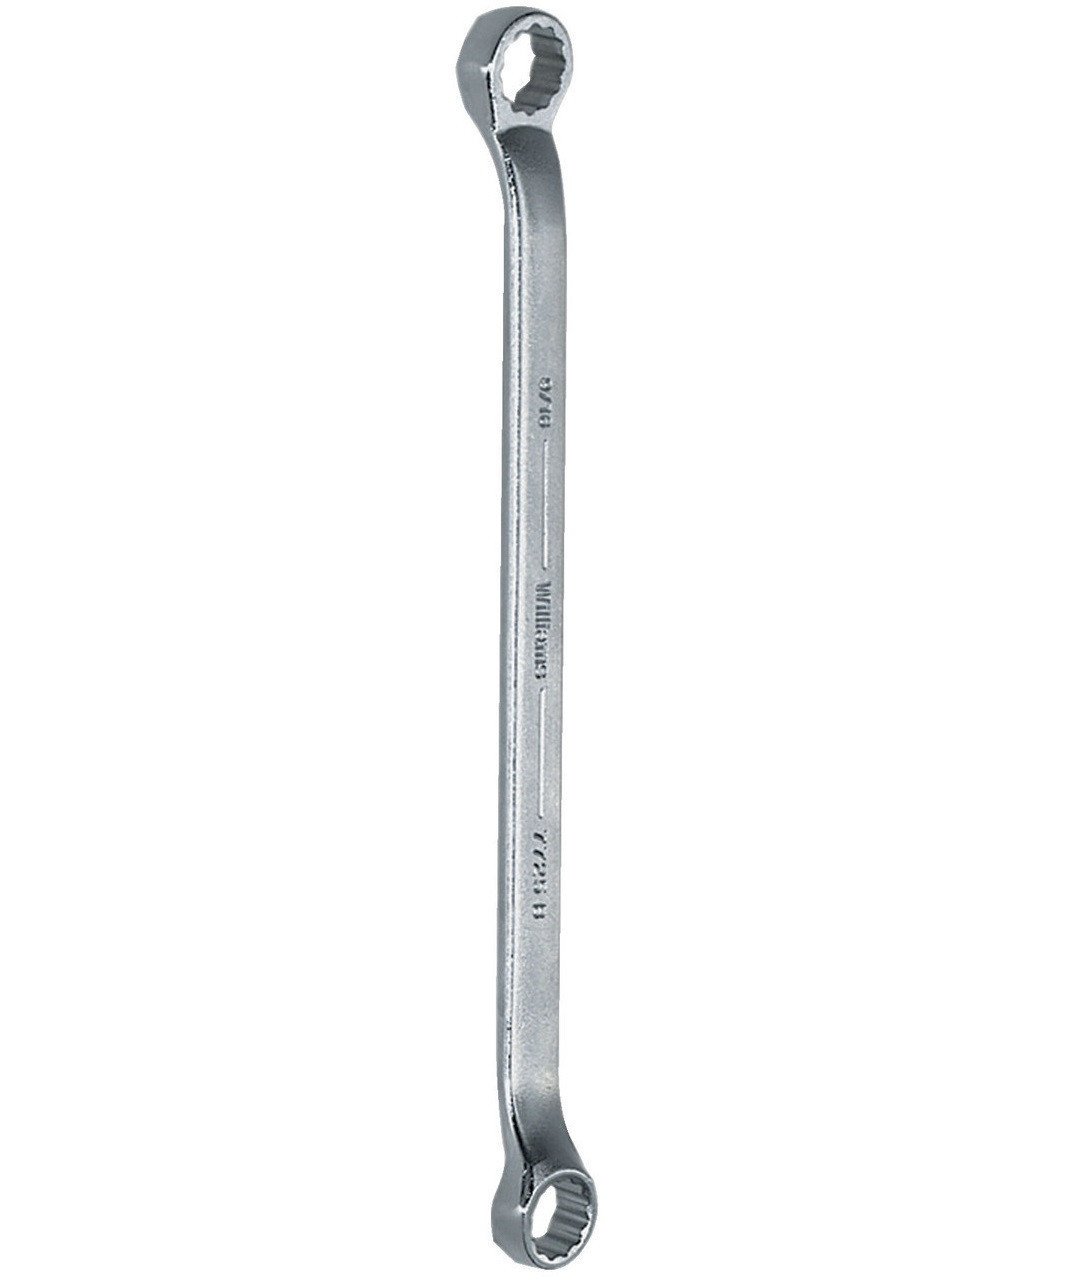 14x17MM Williams Satin Chrome Double Head 10 Degree Offset Box End Wrench 12 PT - JHWBWM-1417